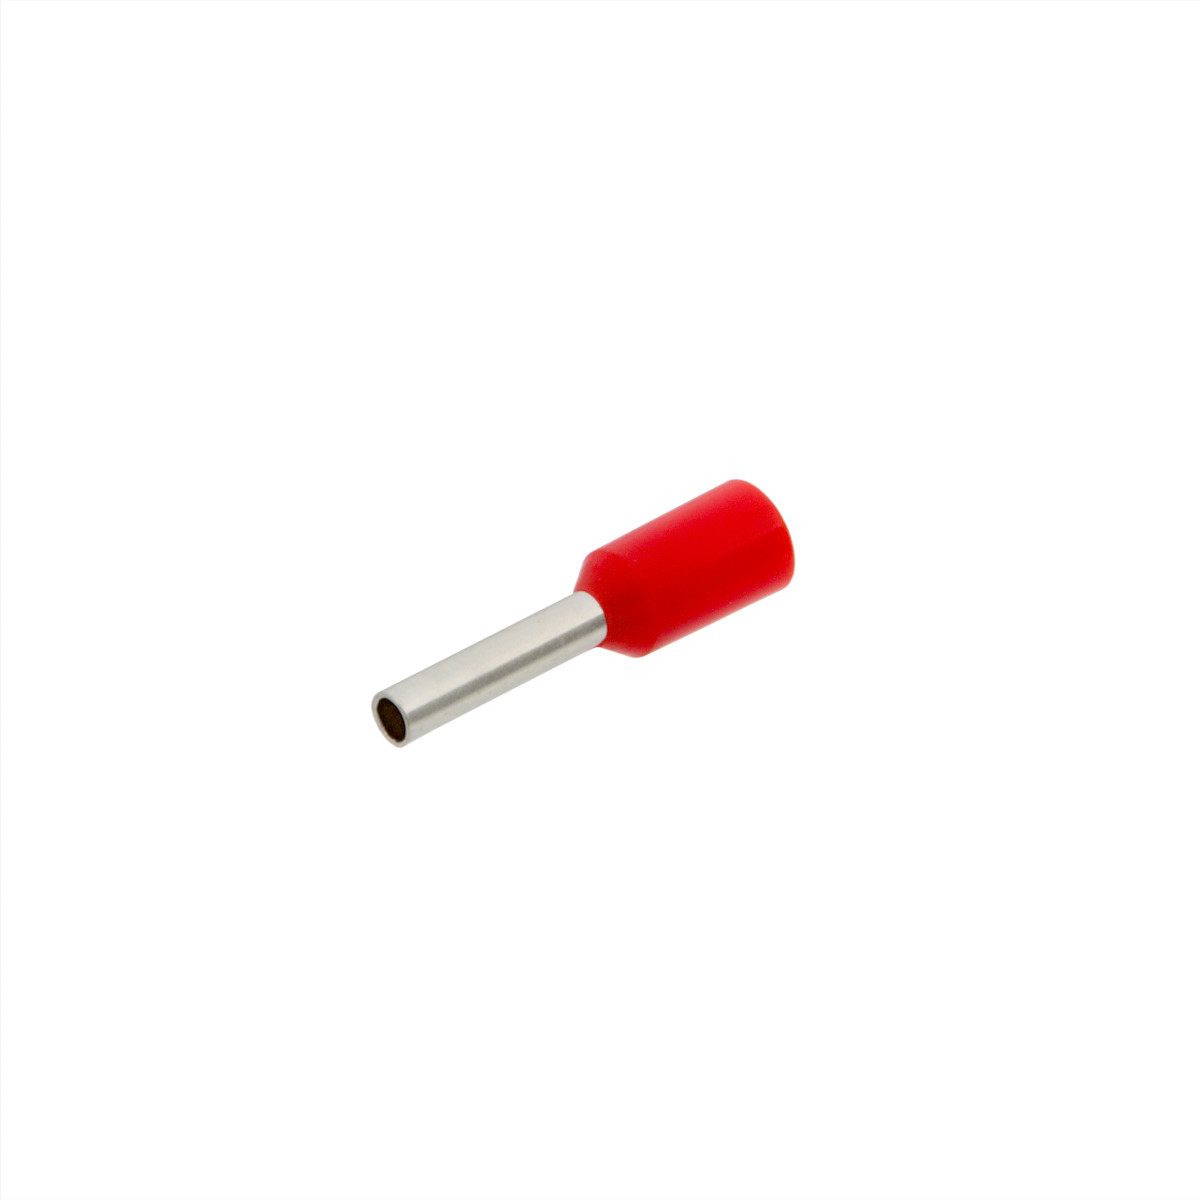 Insulated ferrule for 1.00mm² [AWG 18] cable